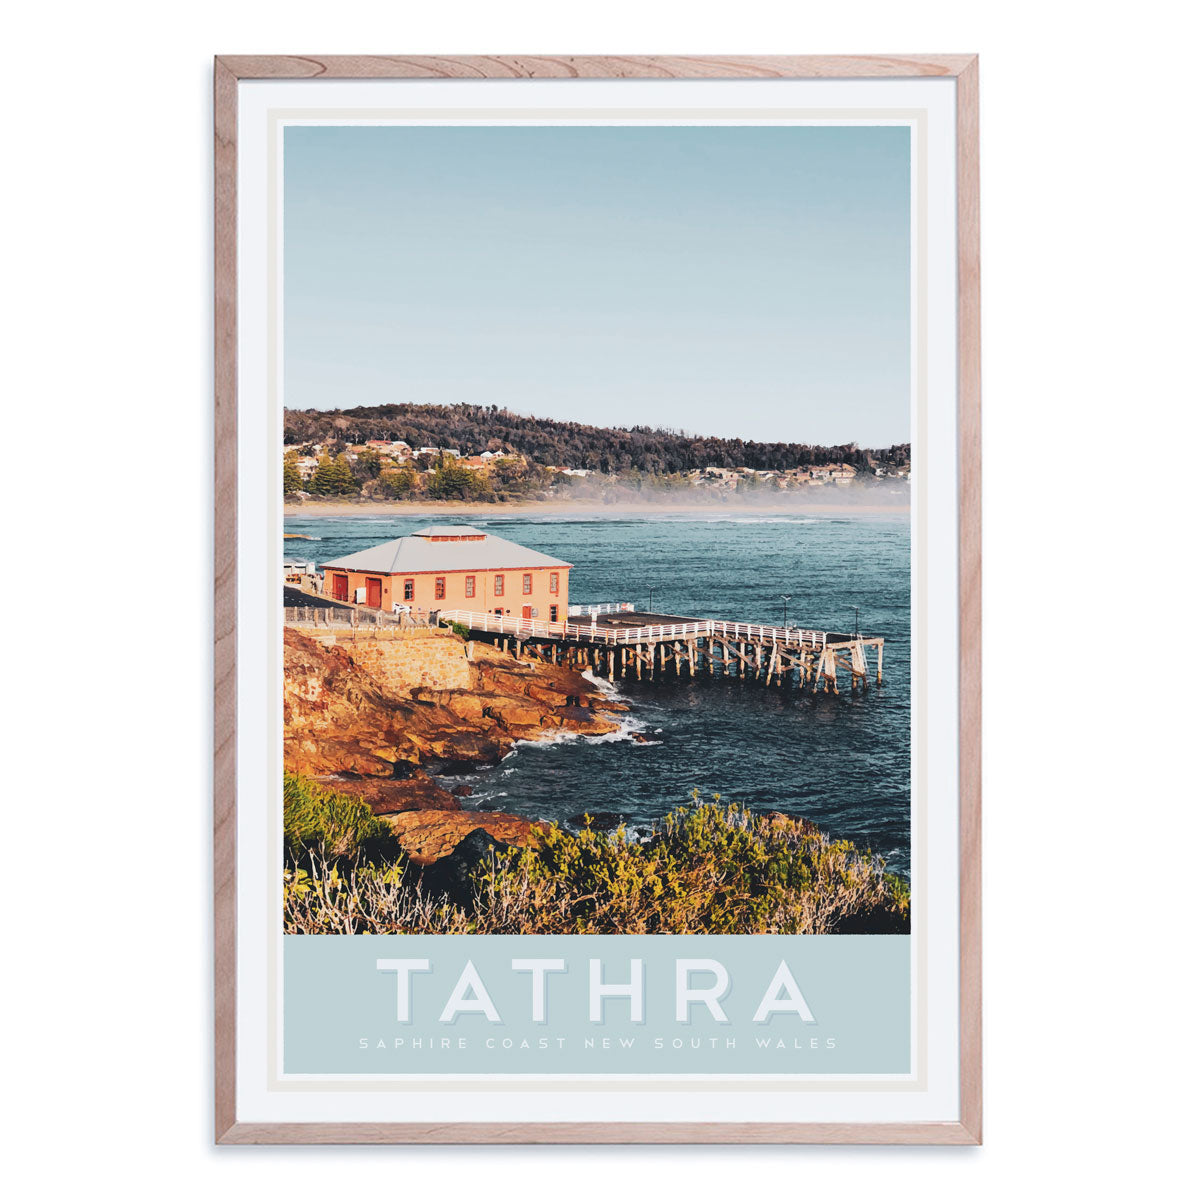 Tathra NSW vintage retro travel poster in oak frame by Places we Luv 